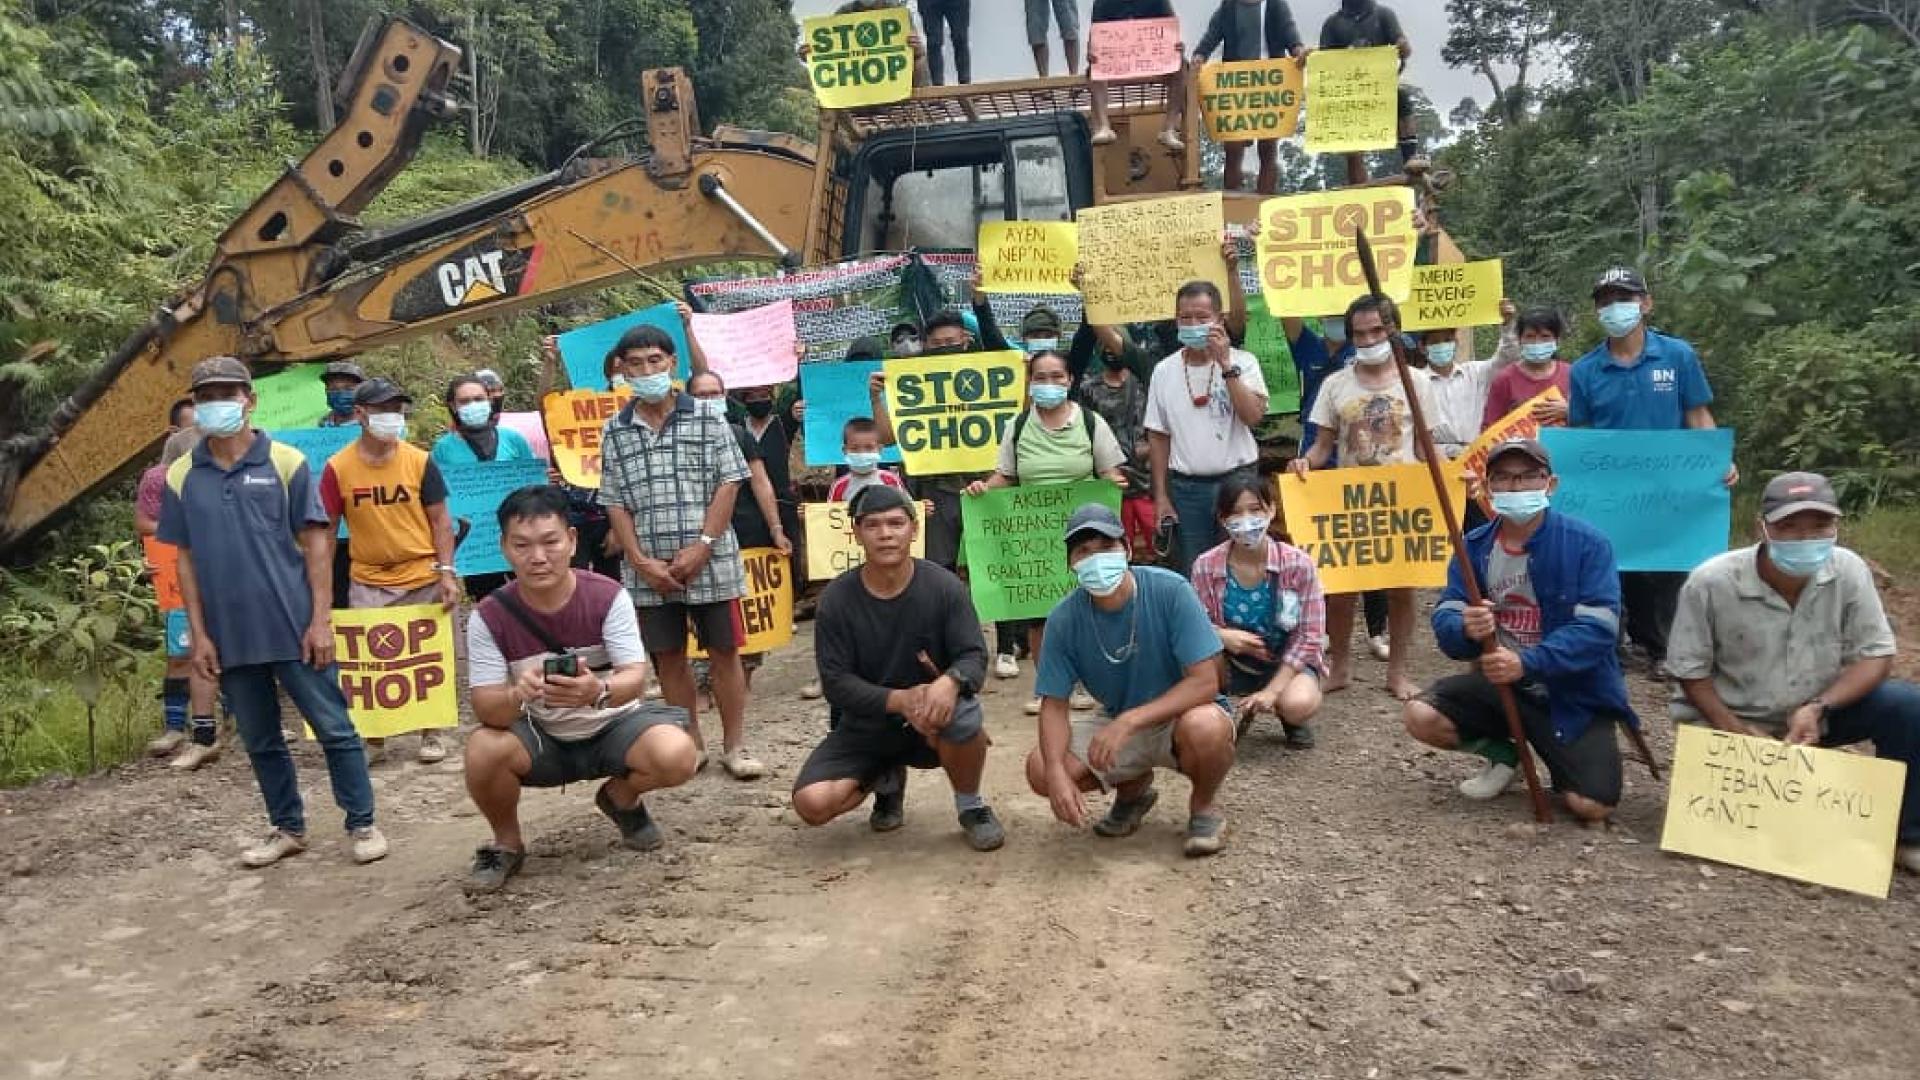 Demo by a group of Malaysian villagers standing in front of earthmoving equipment holding placards reading Stop the Chop in an attempt to protect their forest from loggers.